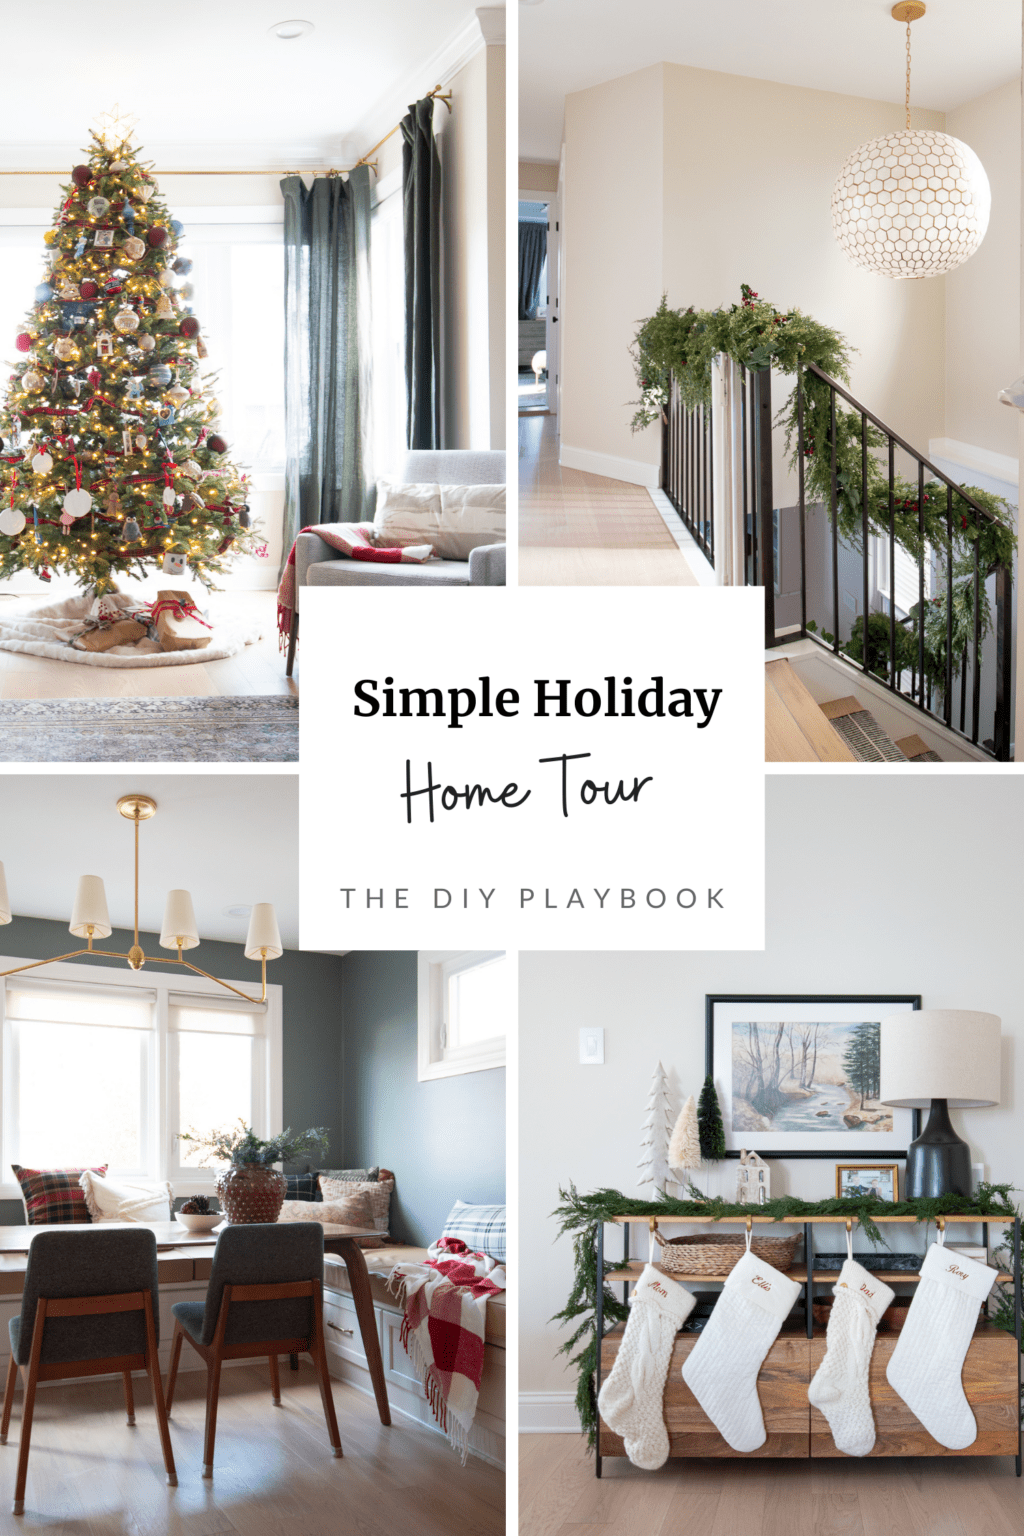 My simple holiday home tour